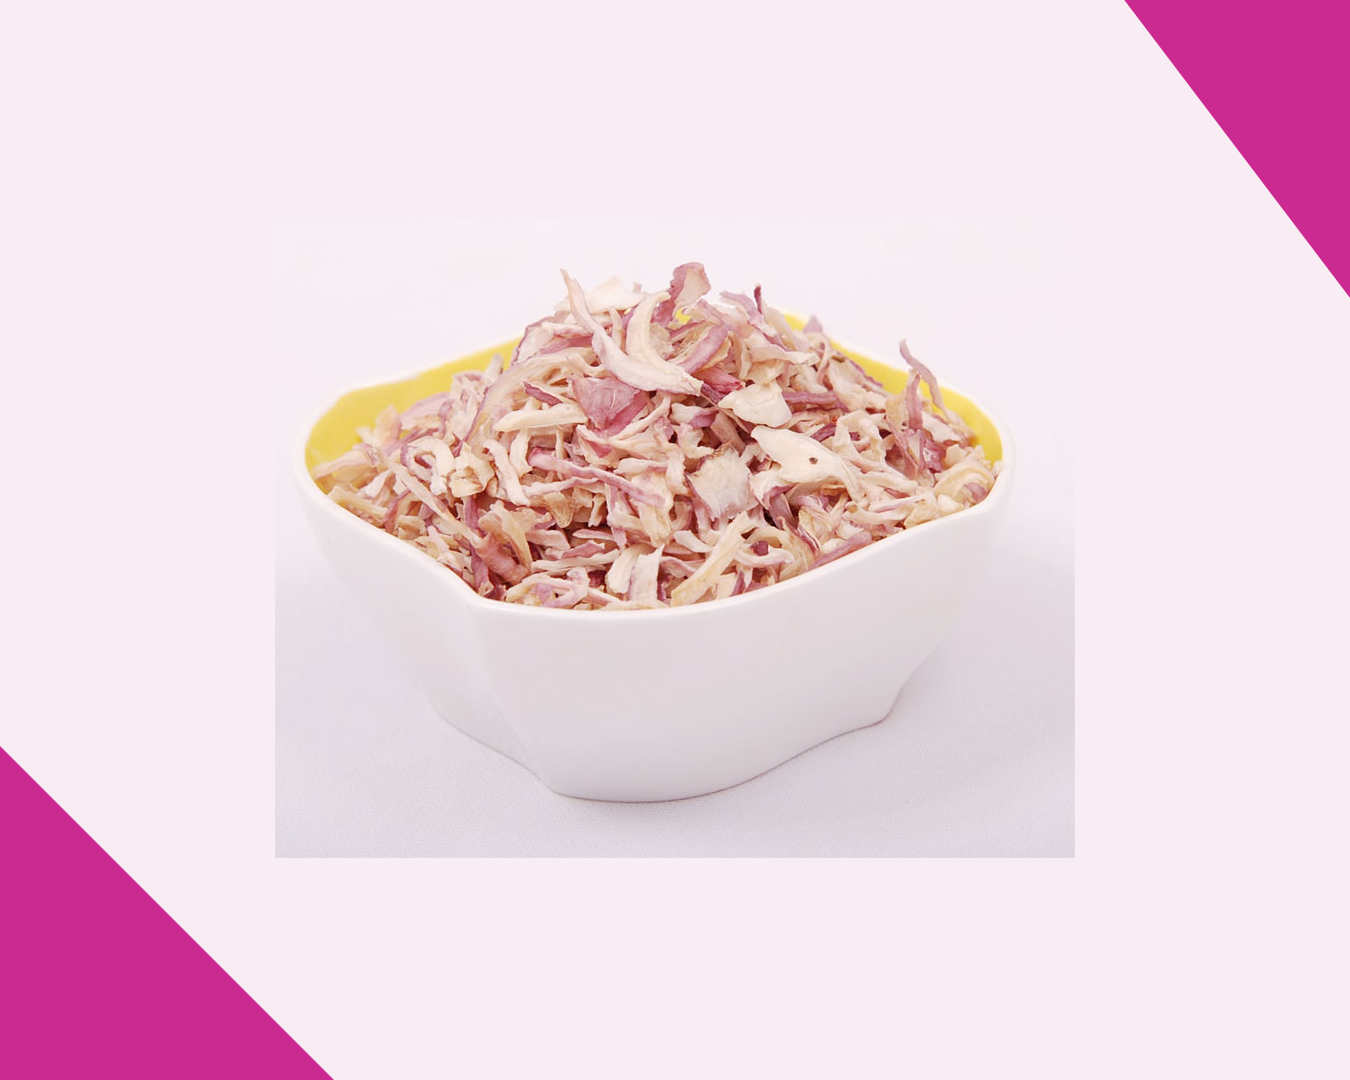 itc products - DEHYDRATED ONIONS